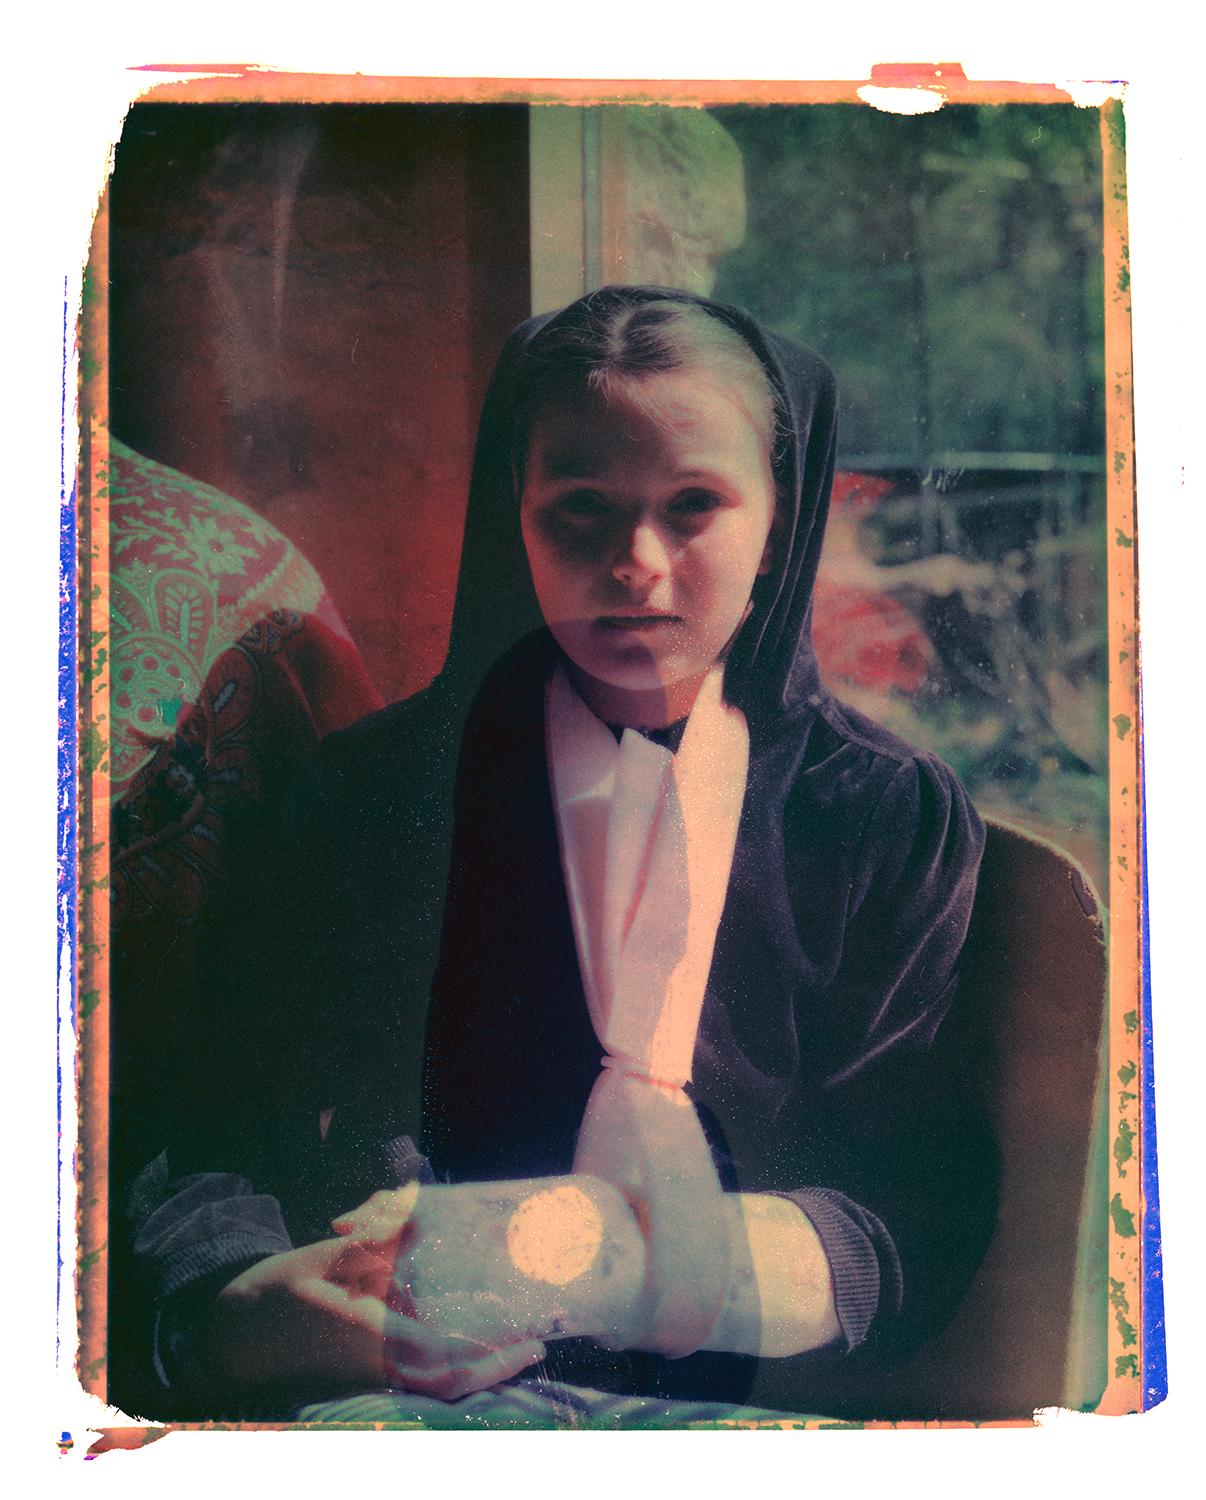 Gaell with broken arm - Contemporary, Polaroid, Photograph, Childhood, abstract